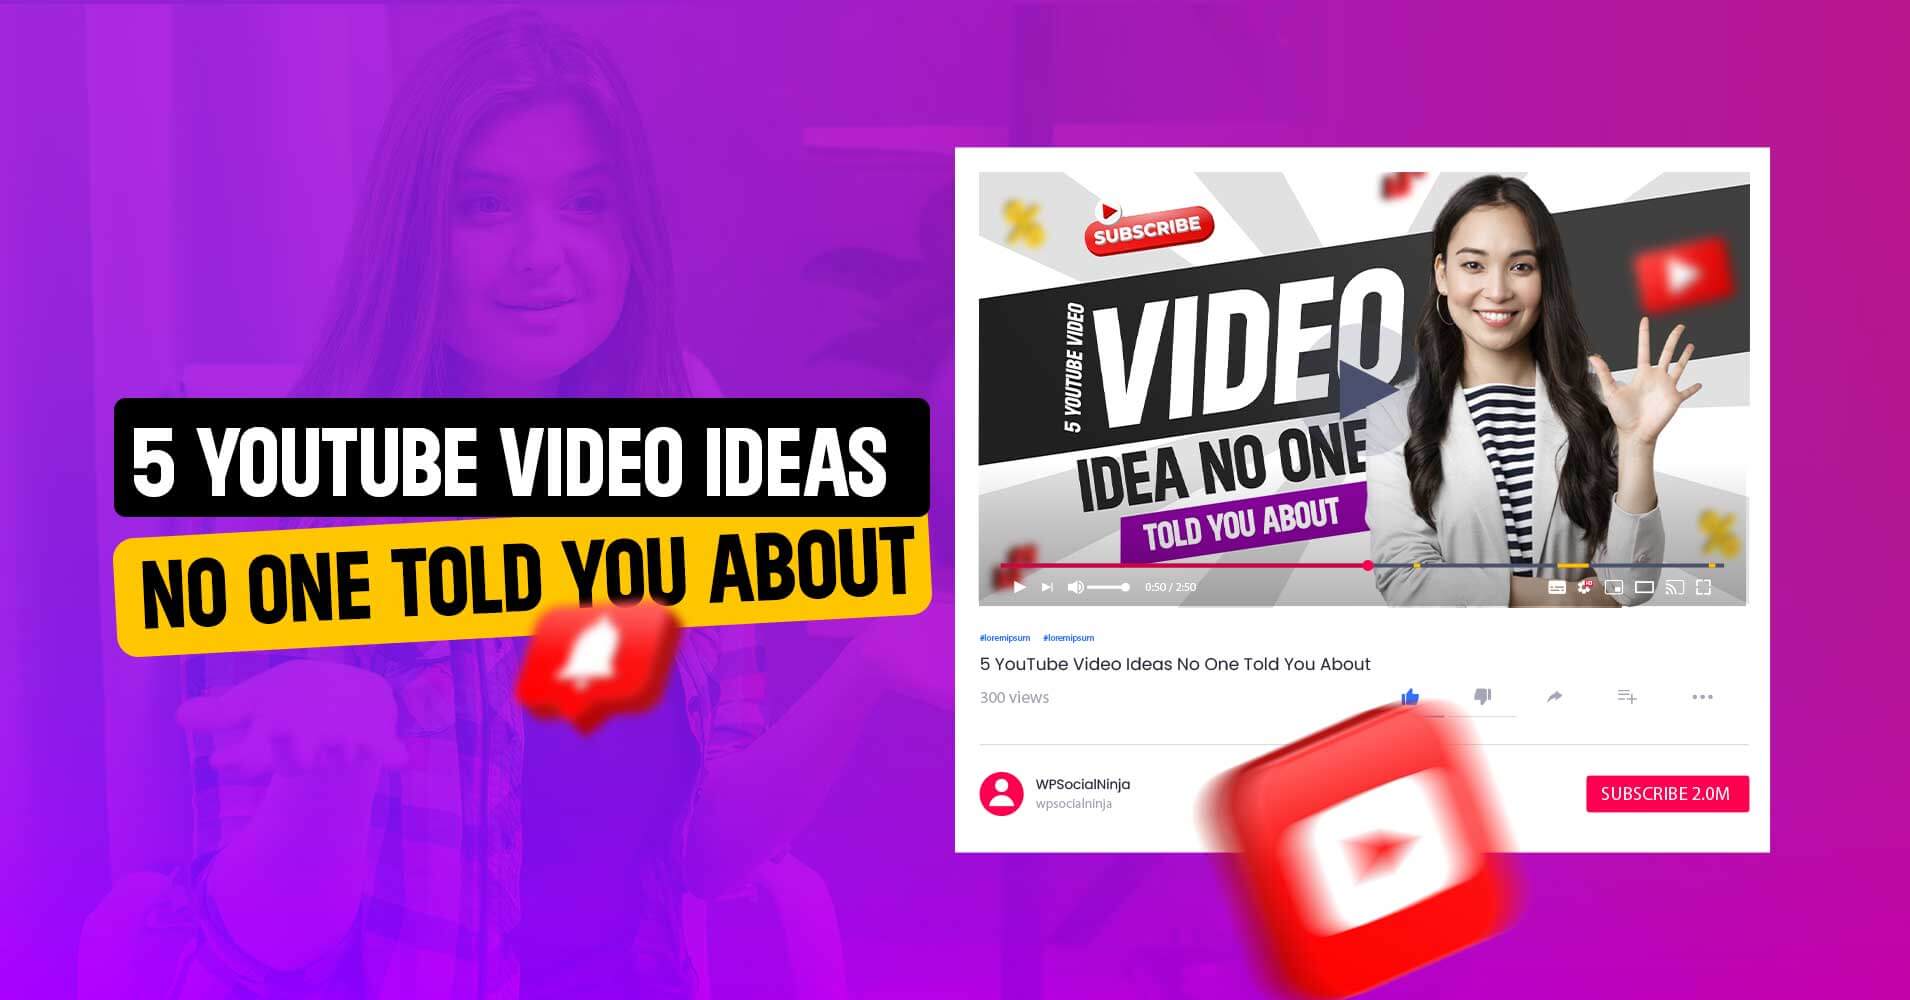 YouTube video ideas are for small business owners. YouTube is a great promotional channel, and proper execution of video contents can help with social media marketing.